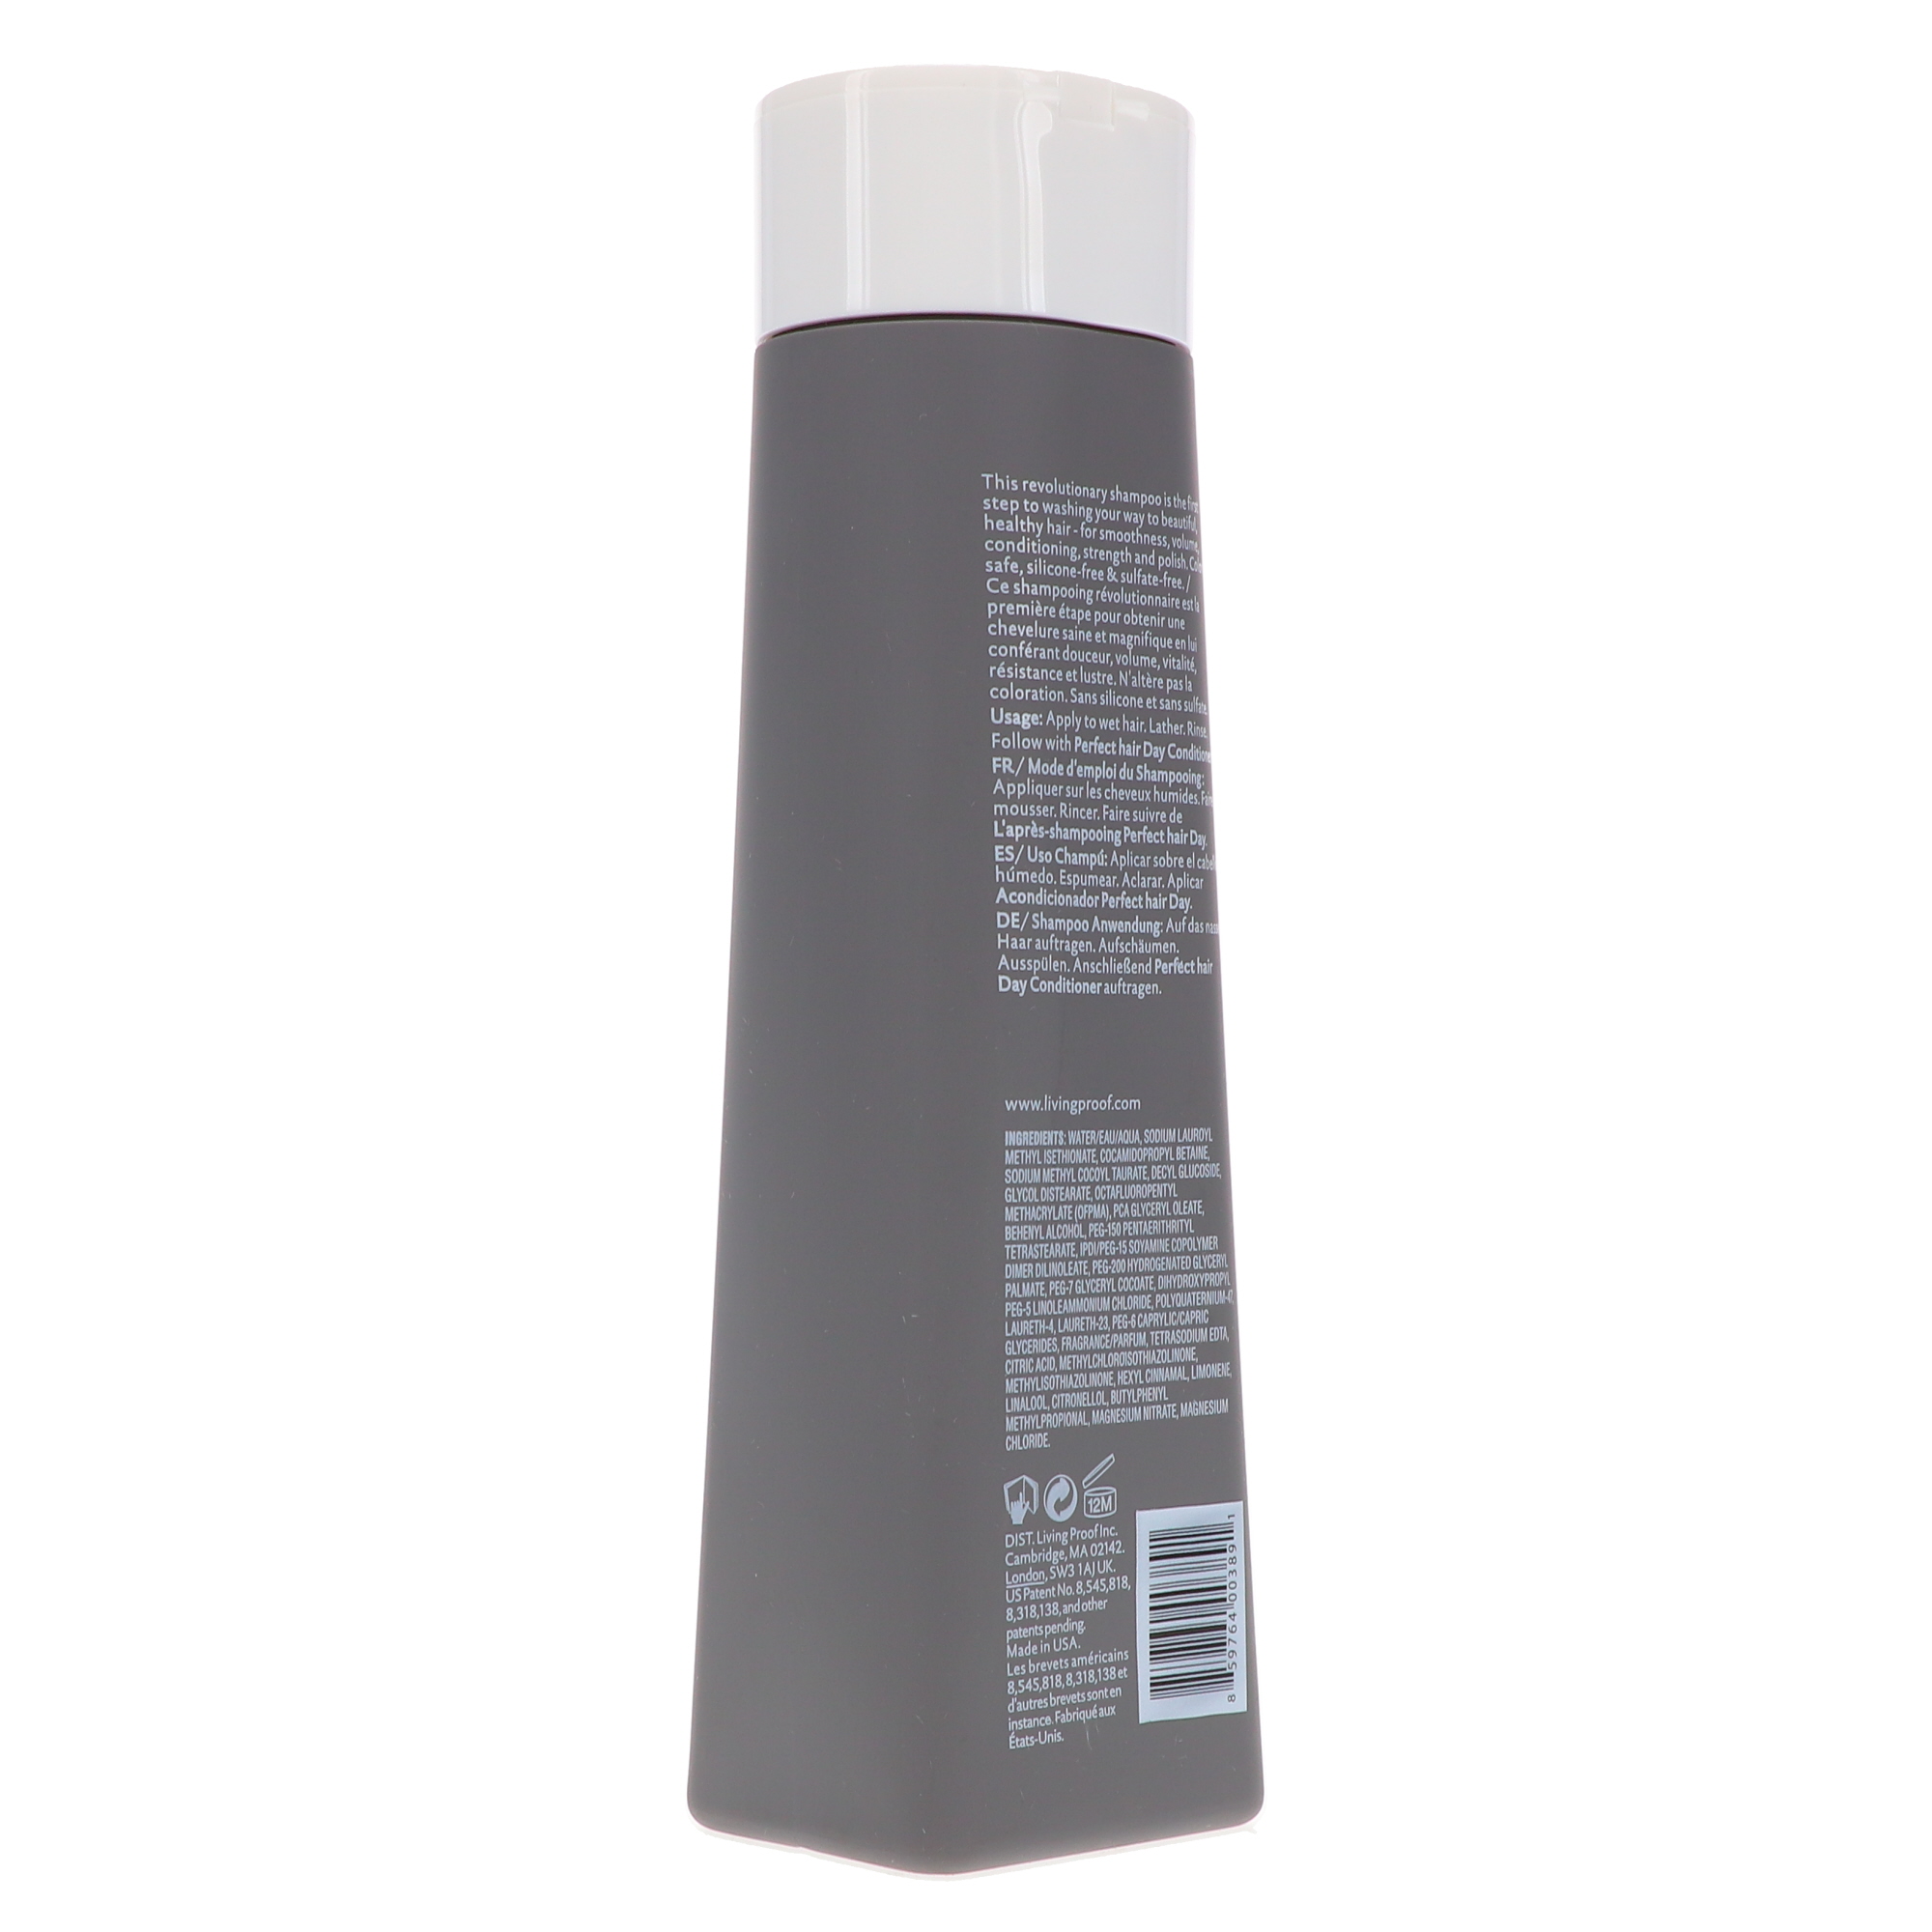 Living Proof Perfect Hair Day Shampoo 8 oz - image 4 of 8